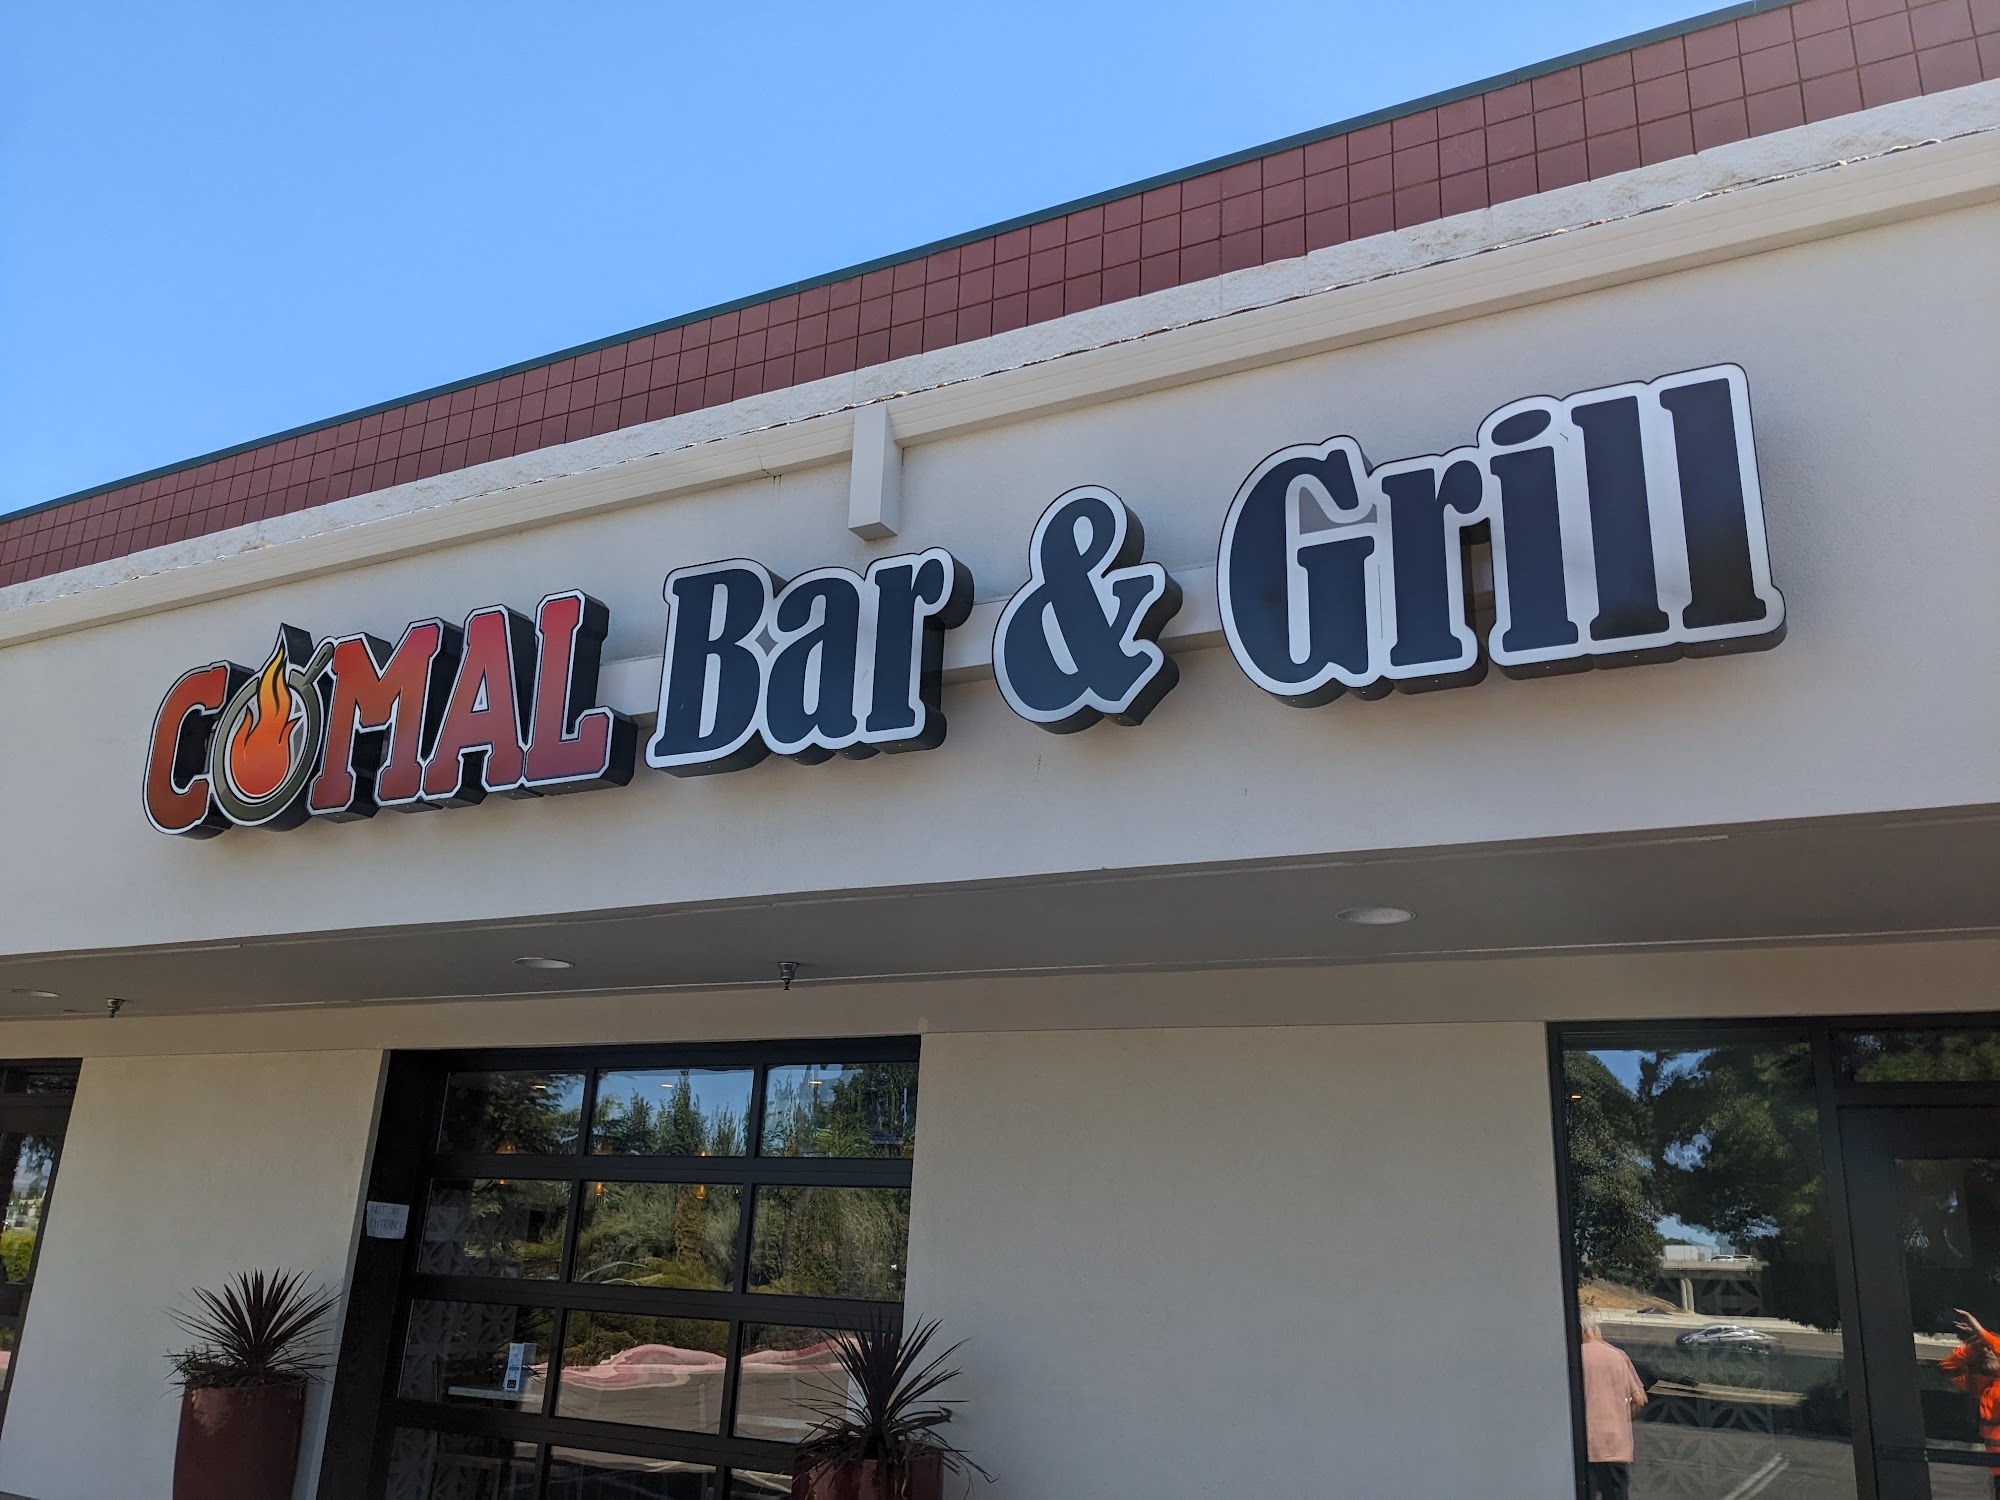 COMAL BAR AND GRILL #2(CENTRAL POINT)